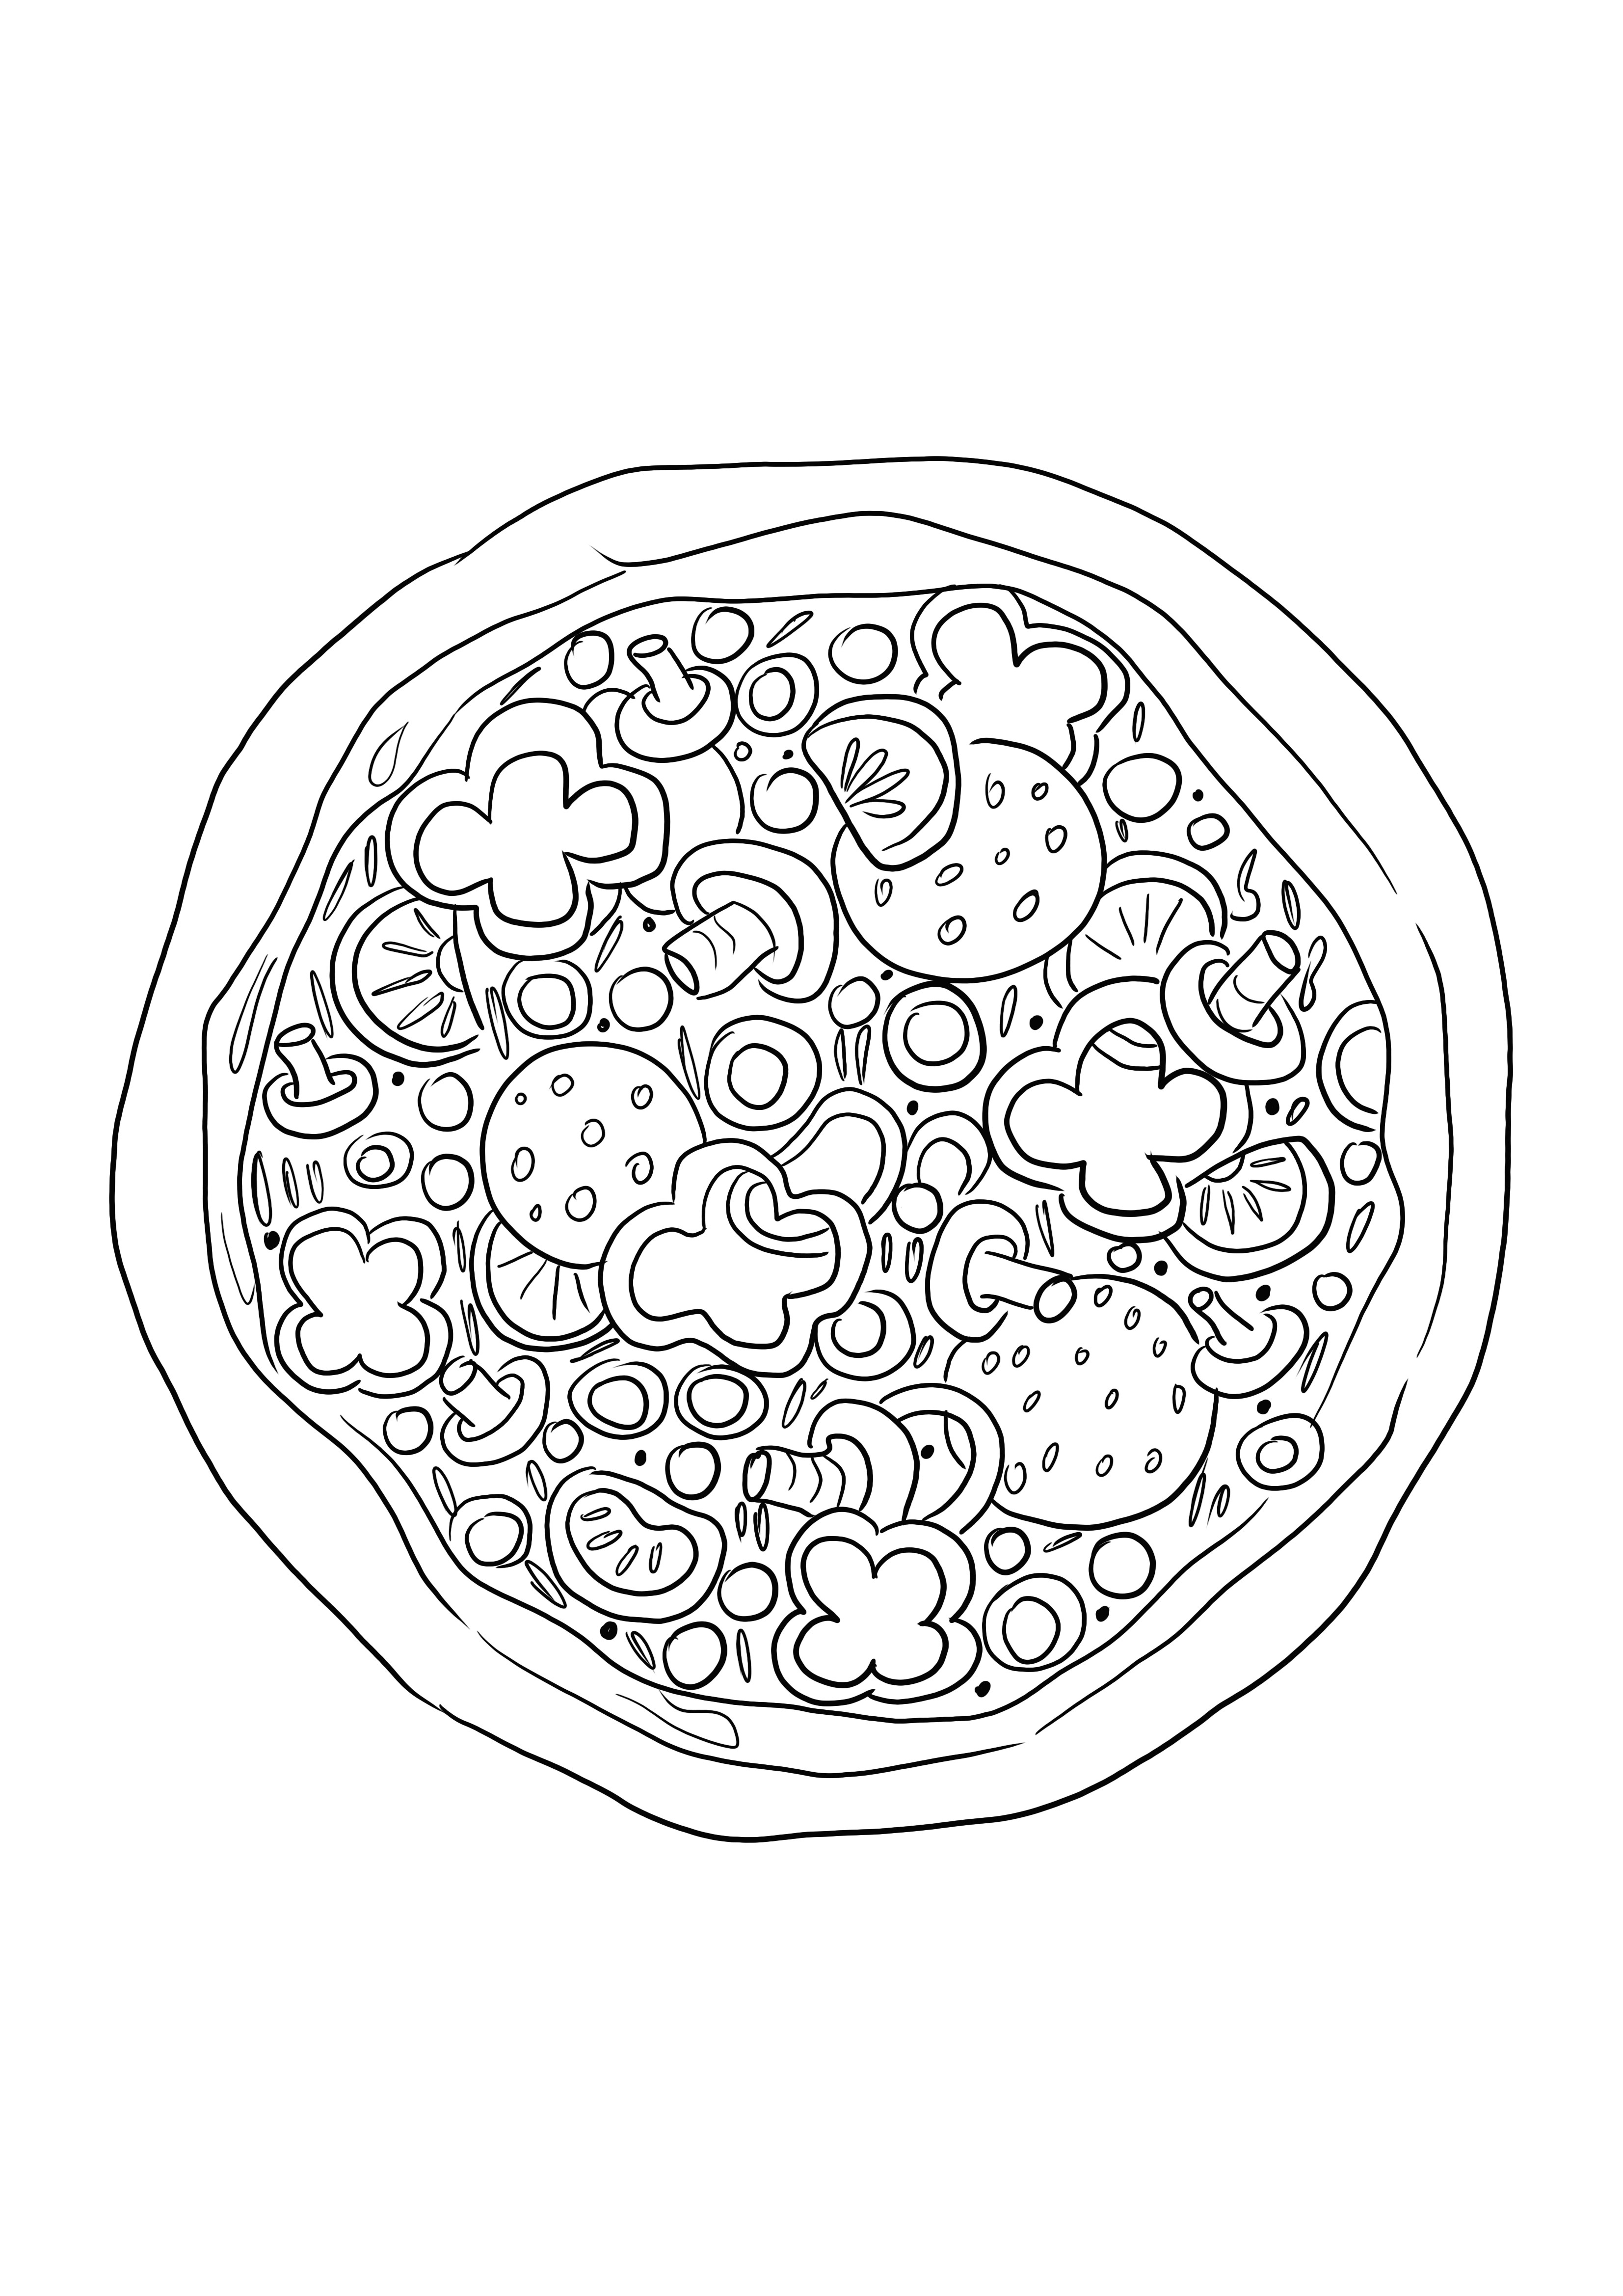 Pizza coloring picture for kids to color easily and learn about food